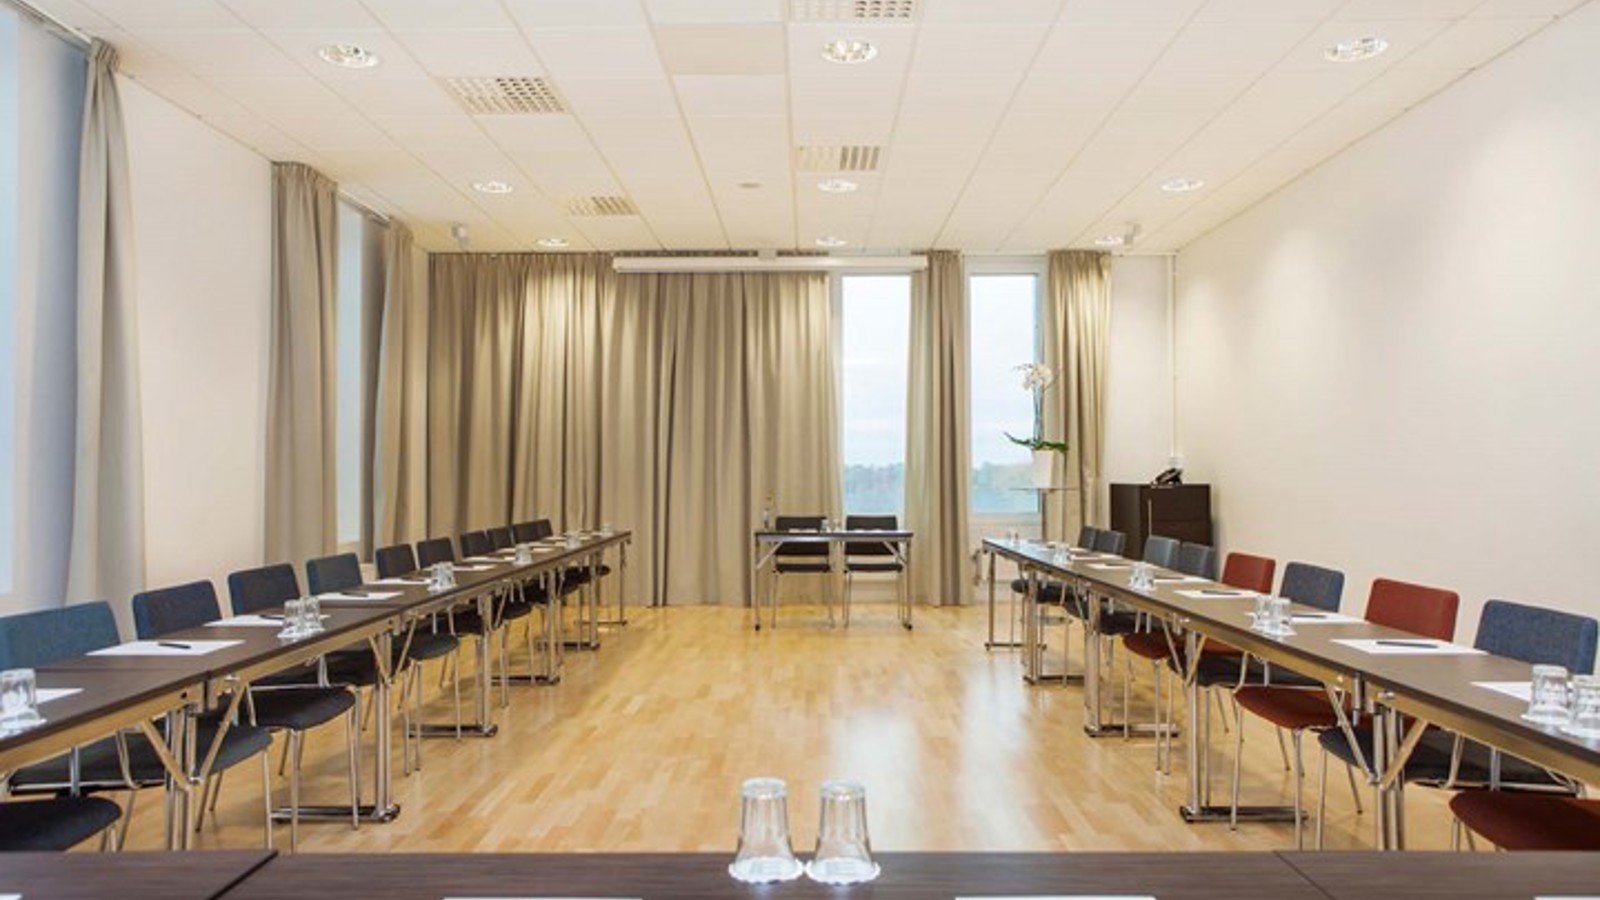 Large conference room with U-shaped seating, light walls and wooden floors